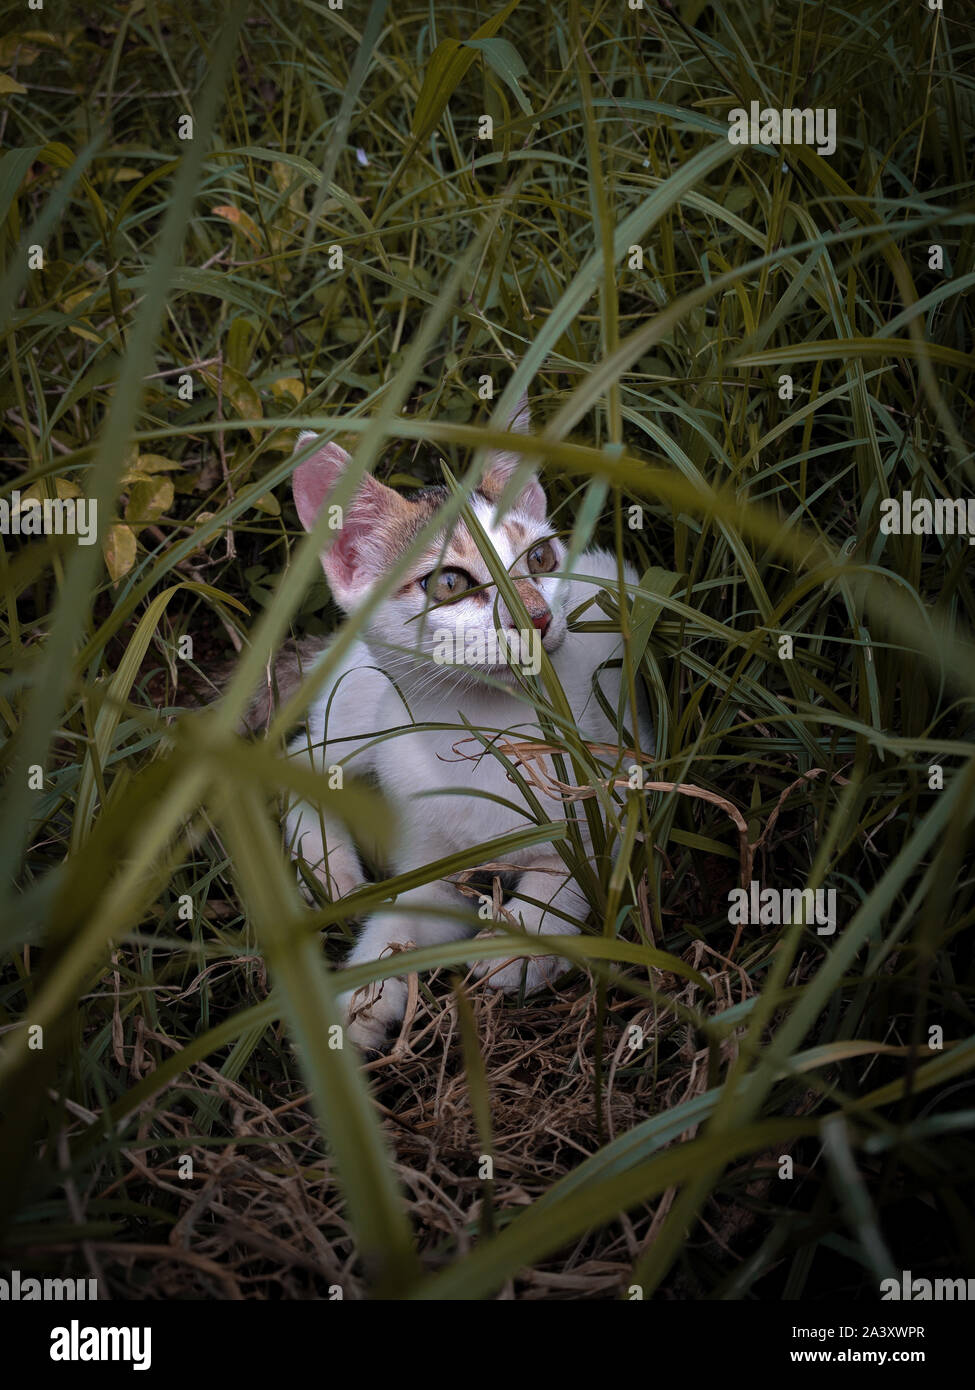 cat in the grass Stock Photo